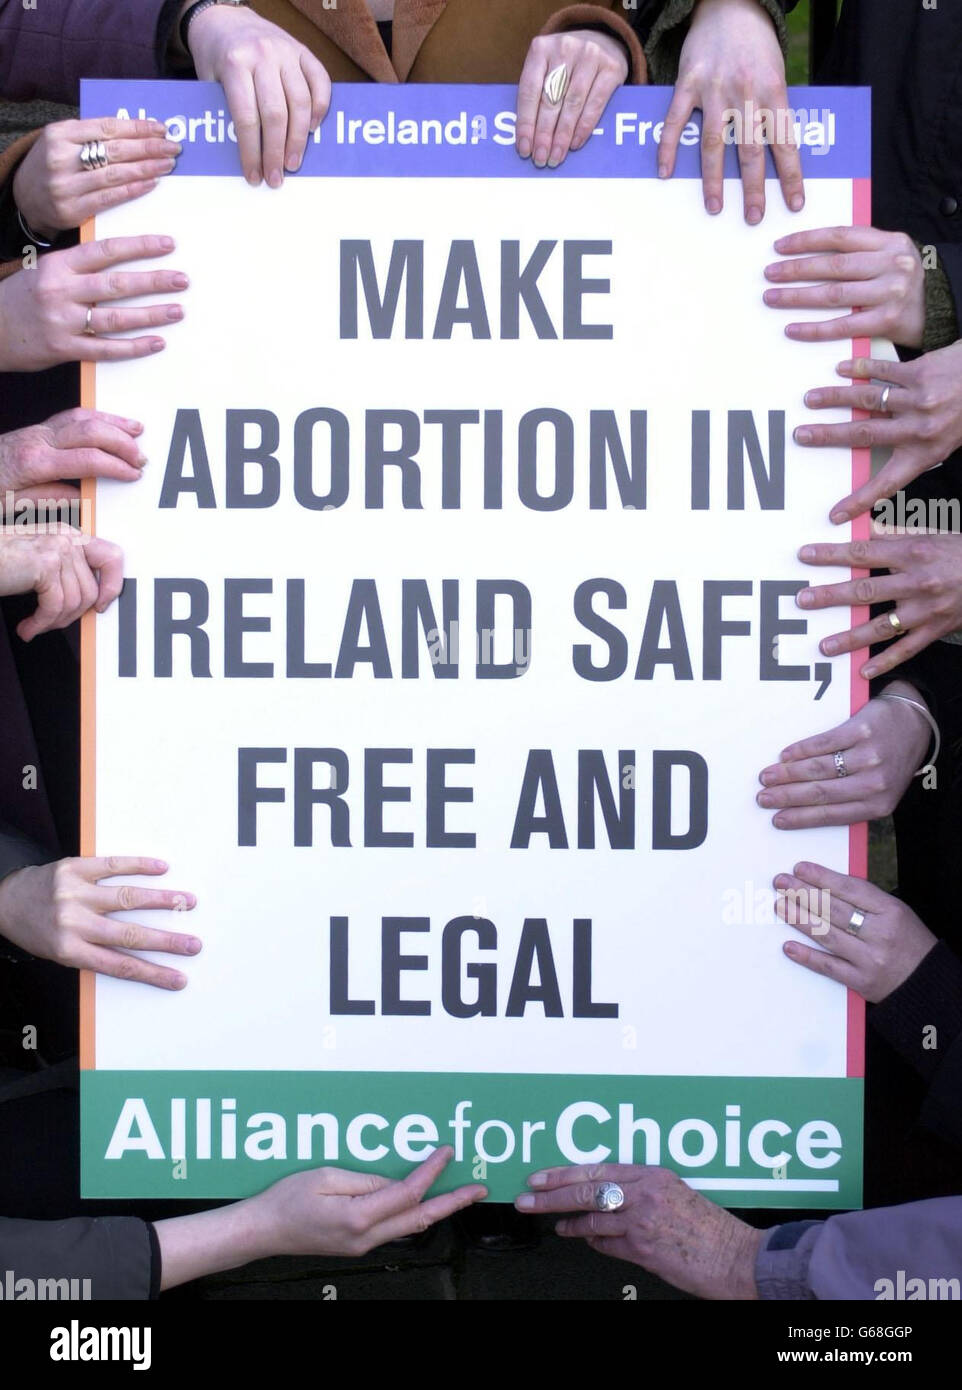 Members of the Alliance for Choice protesting outside Irish Government buildings for safe, free, legal abortion to be available in Ireland. Some 7000 Irish women travel abroad for abortion and the Alliance wants the government to recognise their needs. Stock Photo